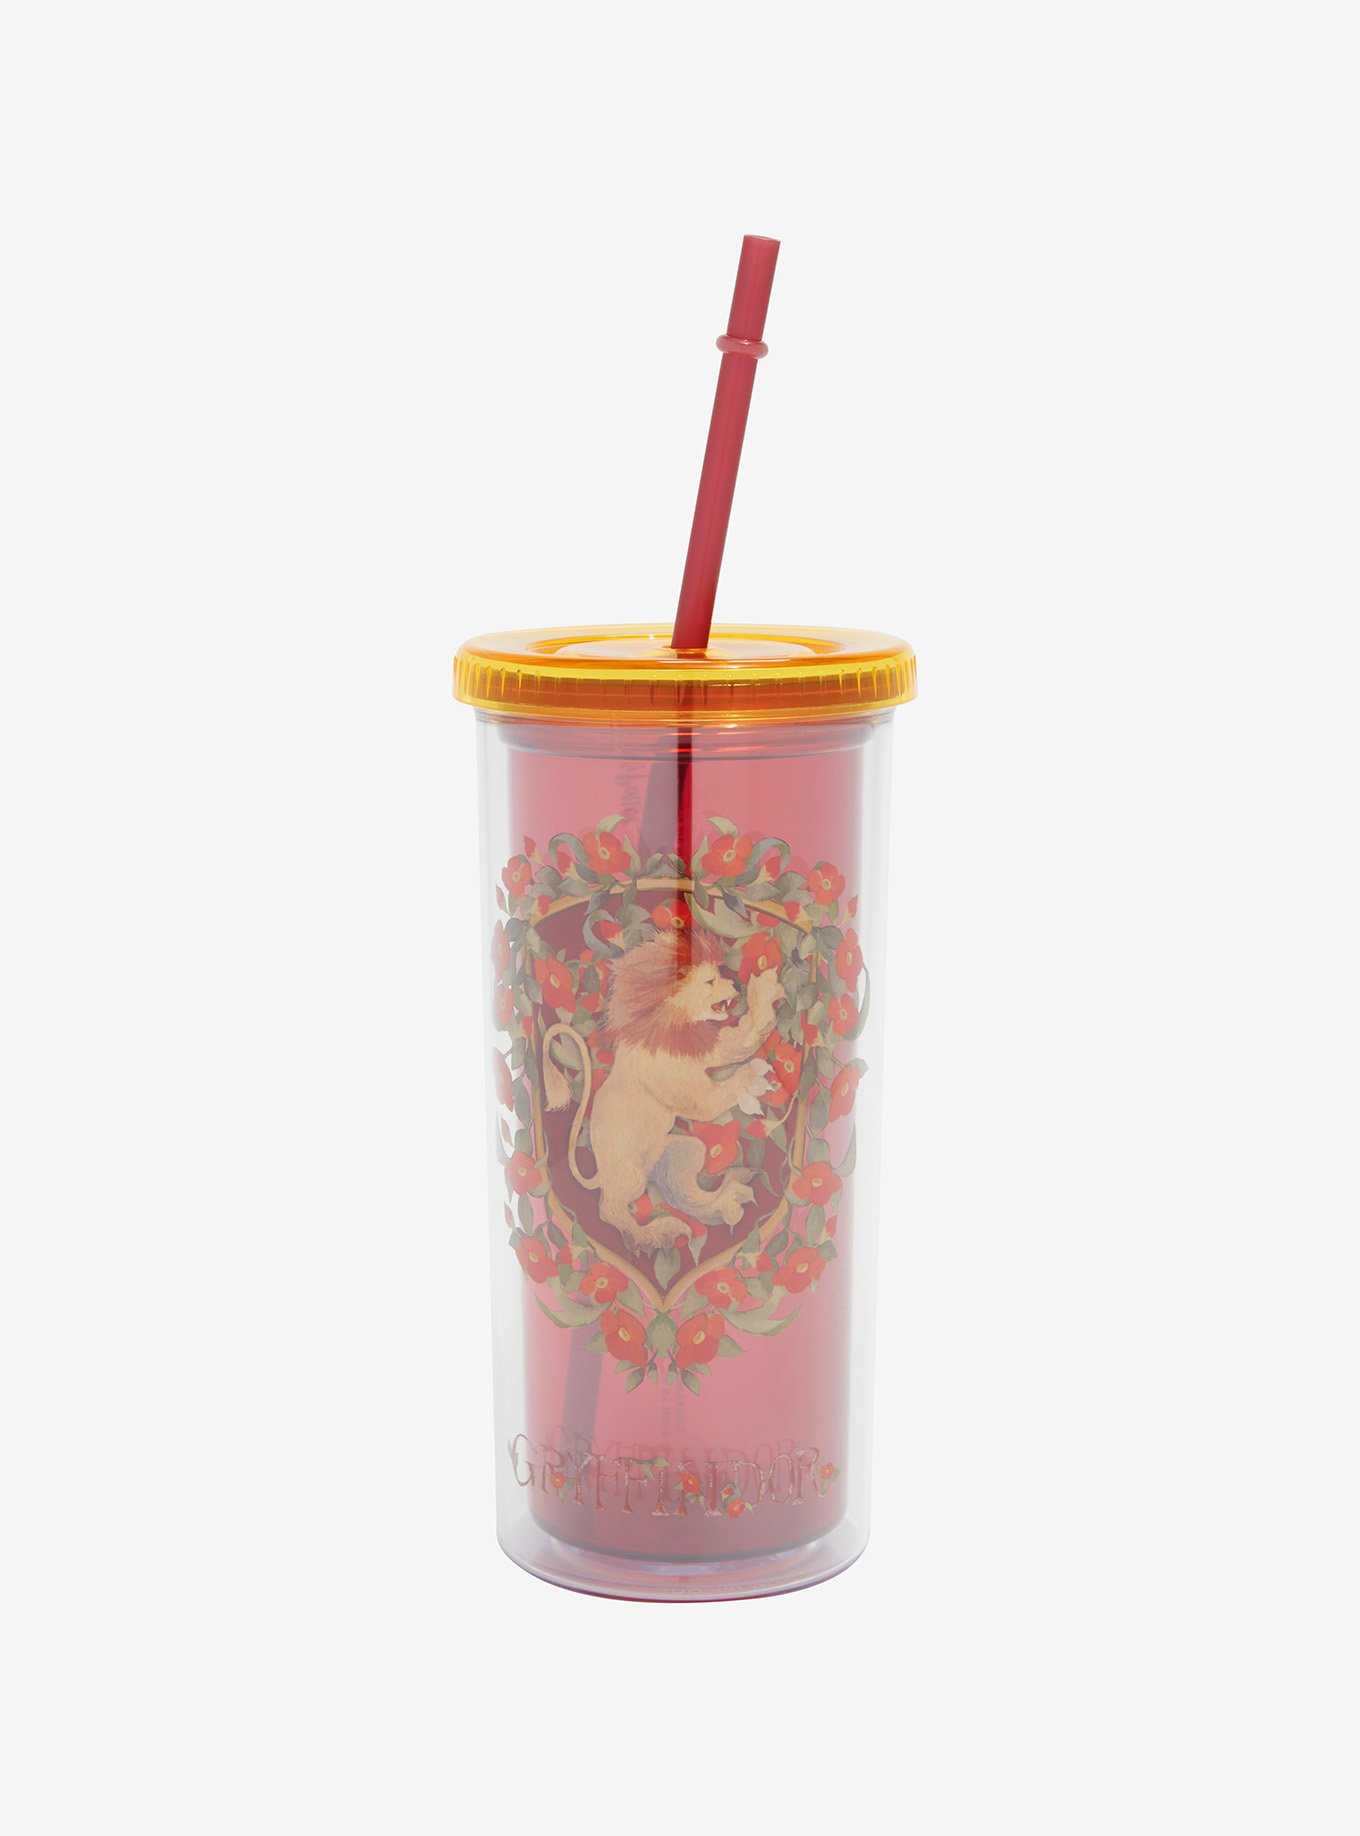 GSPY Aesthetic Flower Cups With Lids and Straws - Iced Coffee Glasses,  Tumblers for Birthdays, Chris…See more GSPY Aesthetic Flower Cups With Lids  and